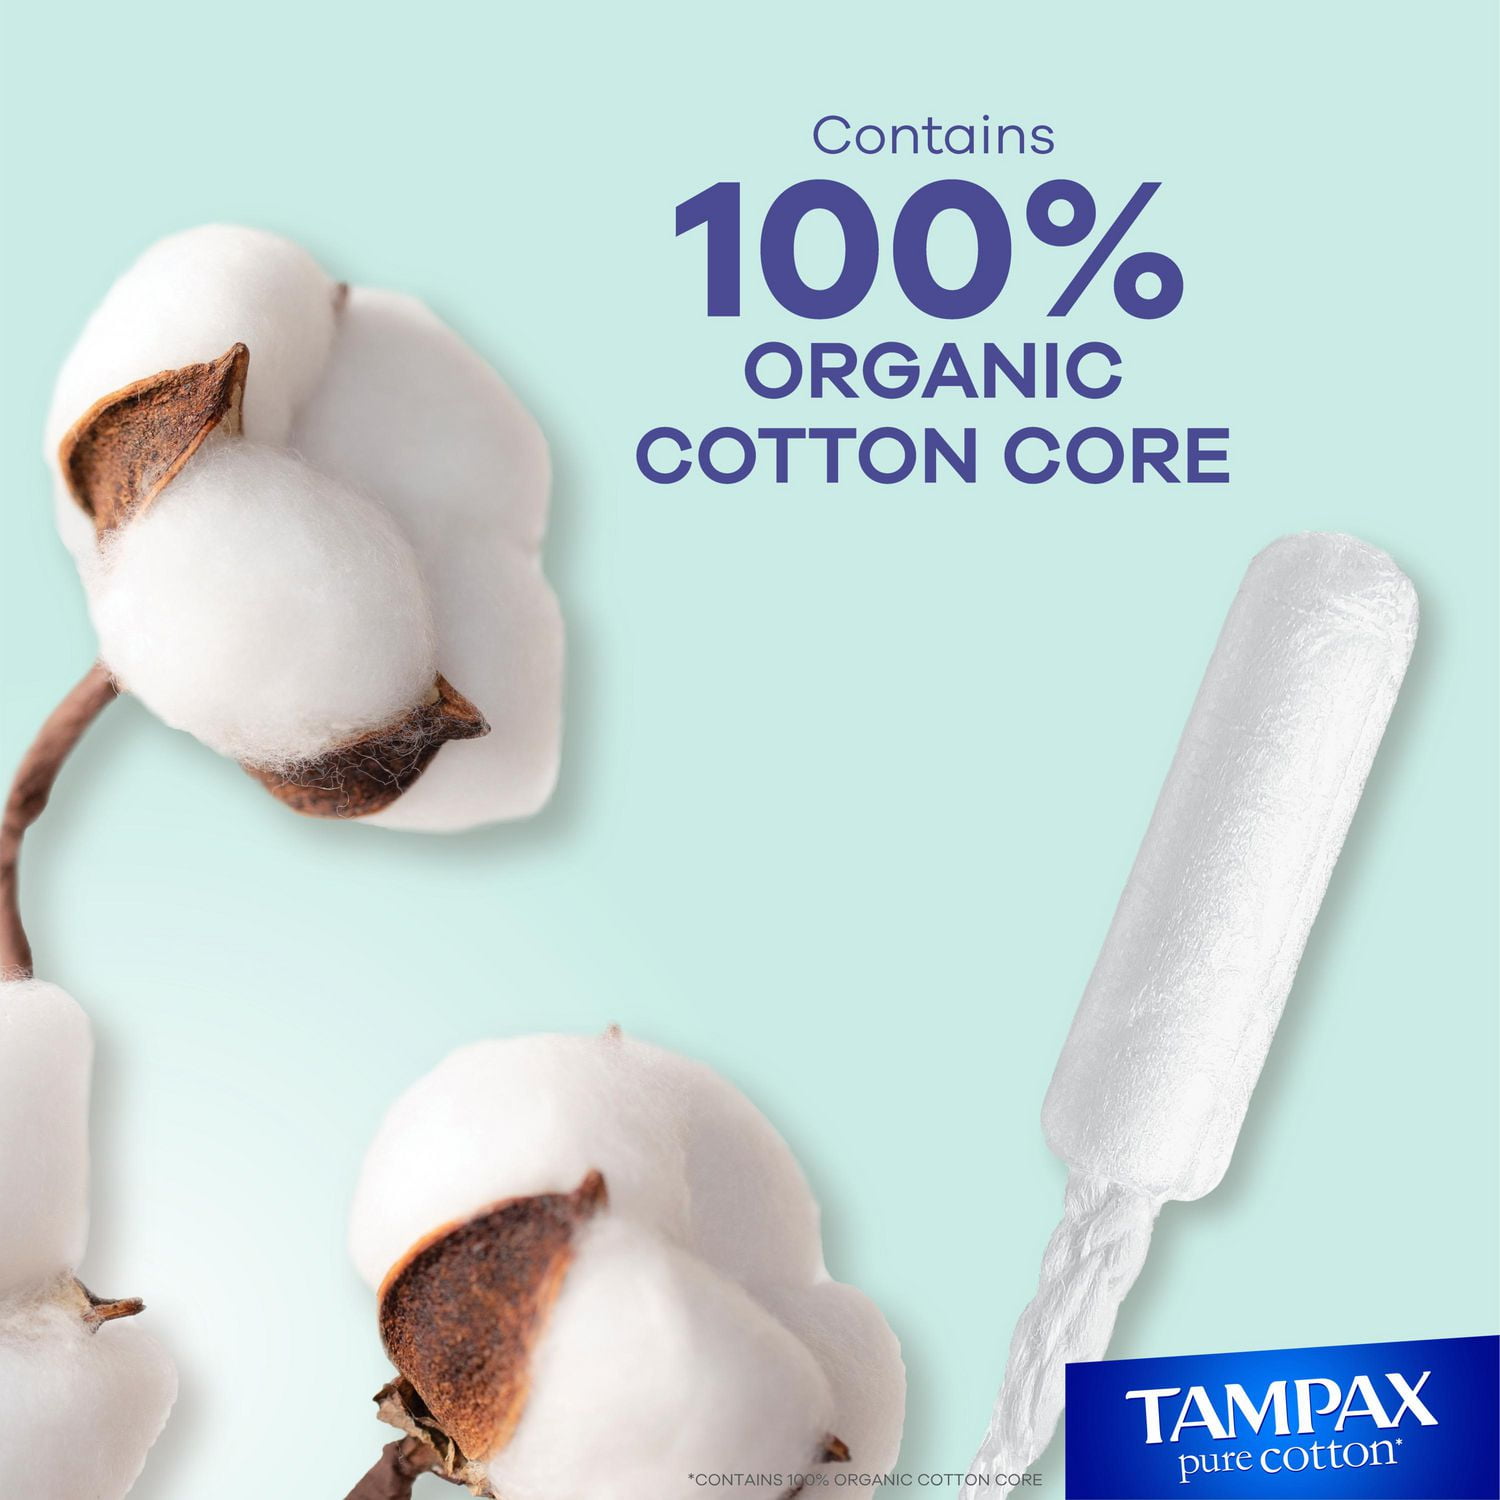 Tampax Pure Cotton Tampons - Super - 24ct : Target